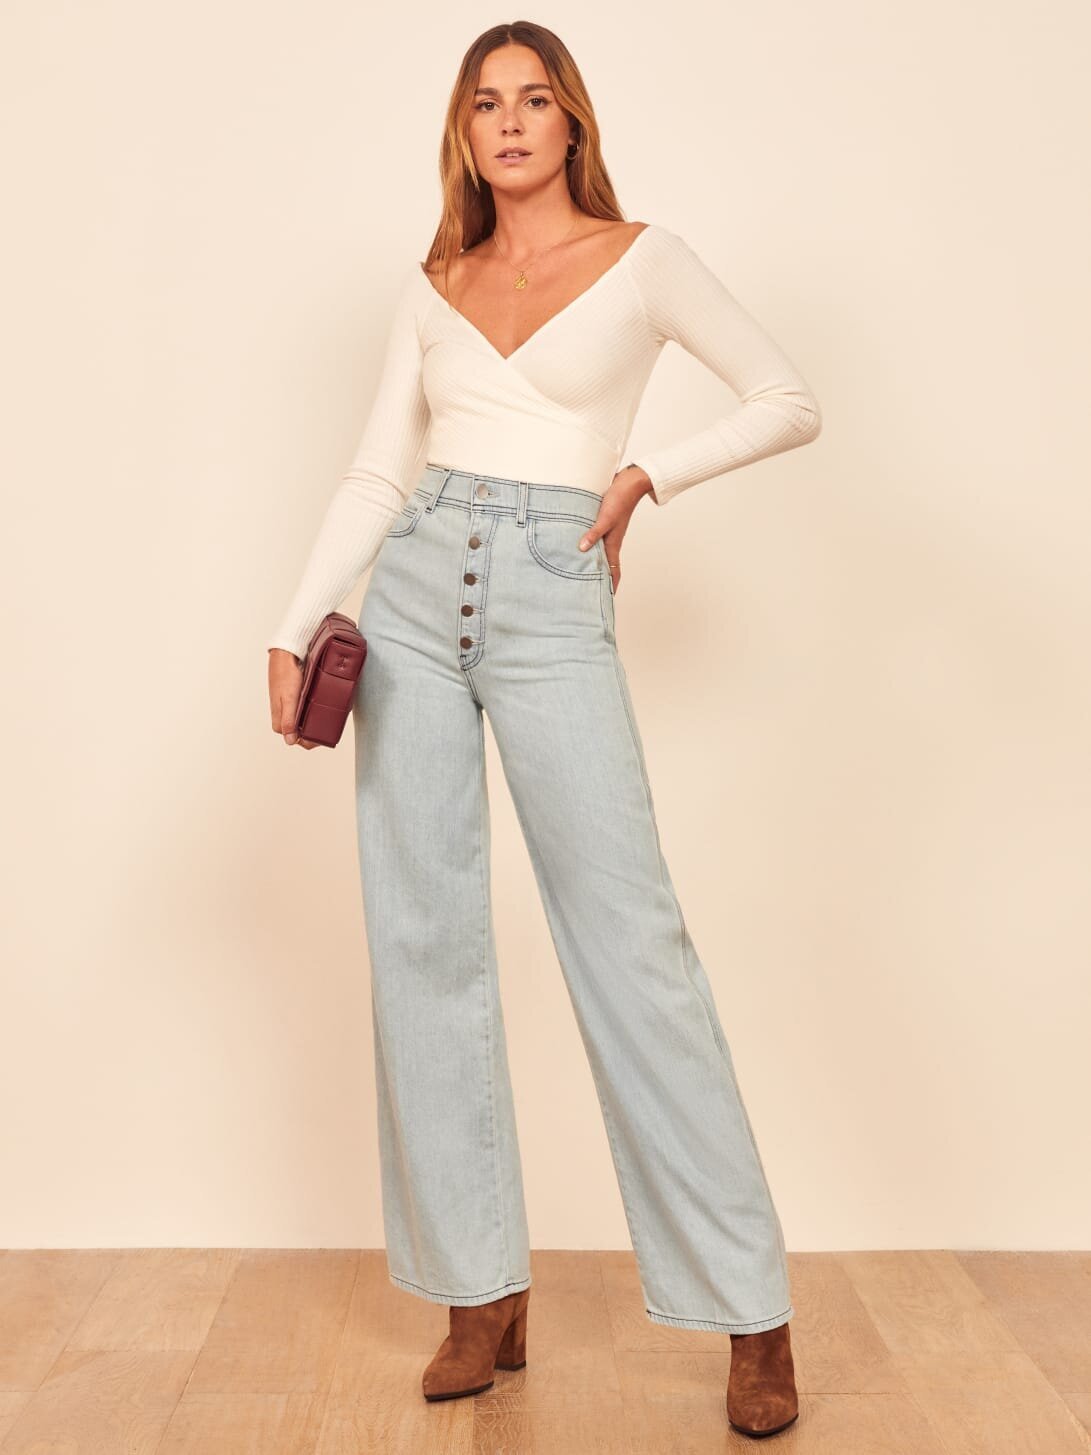 is flare jeans back in style 2019